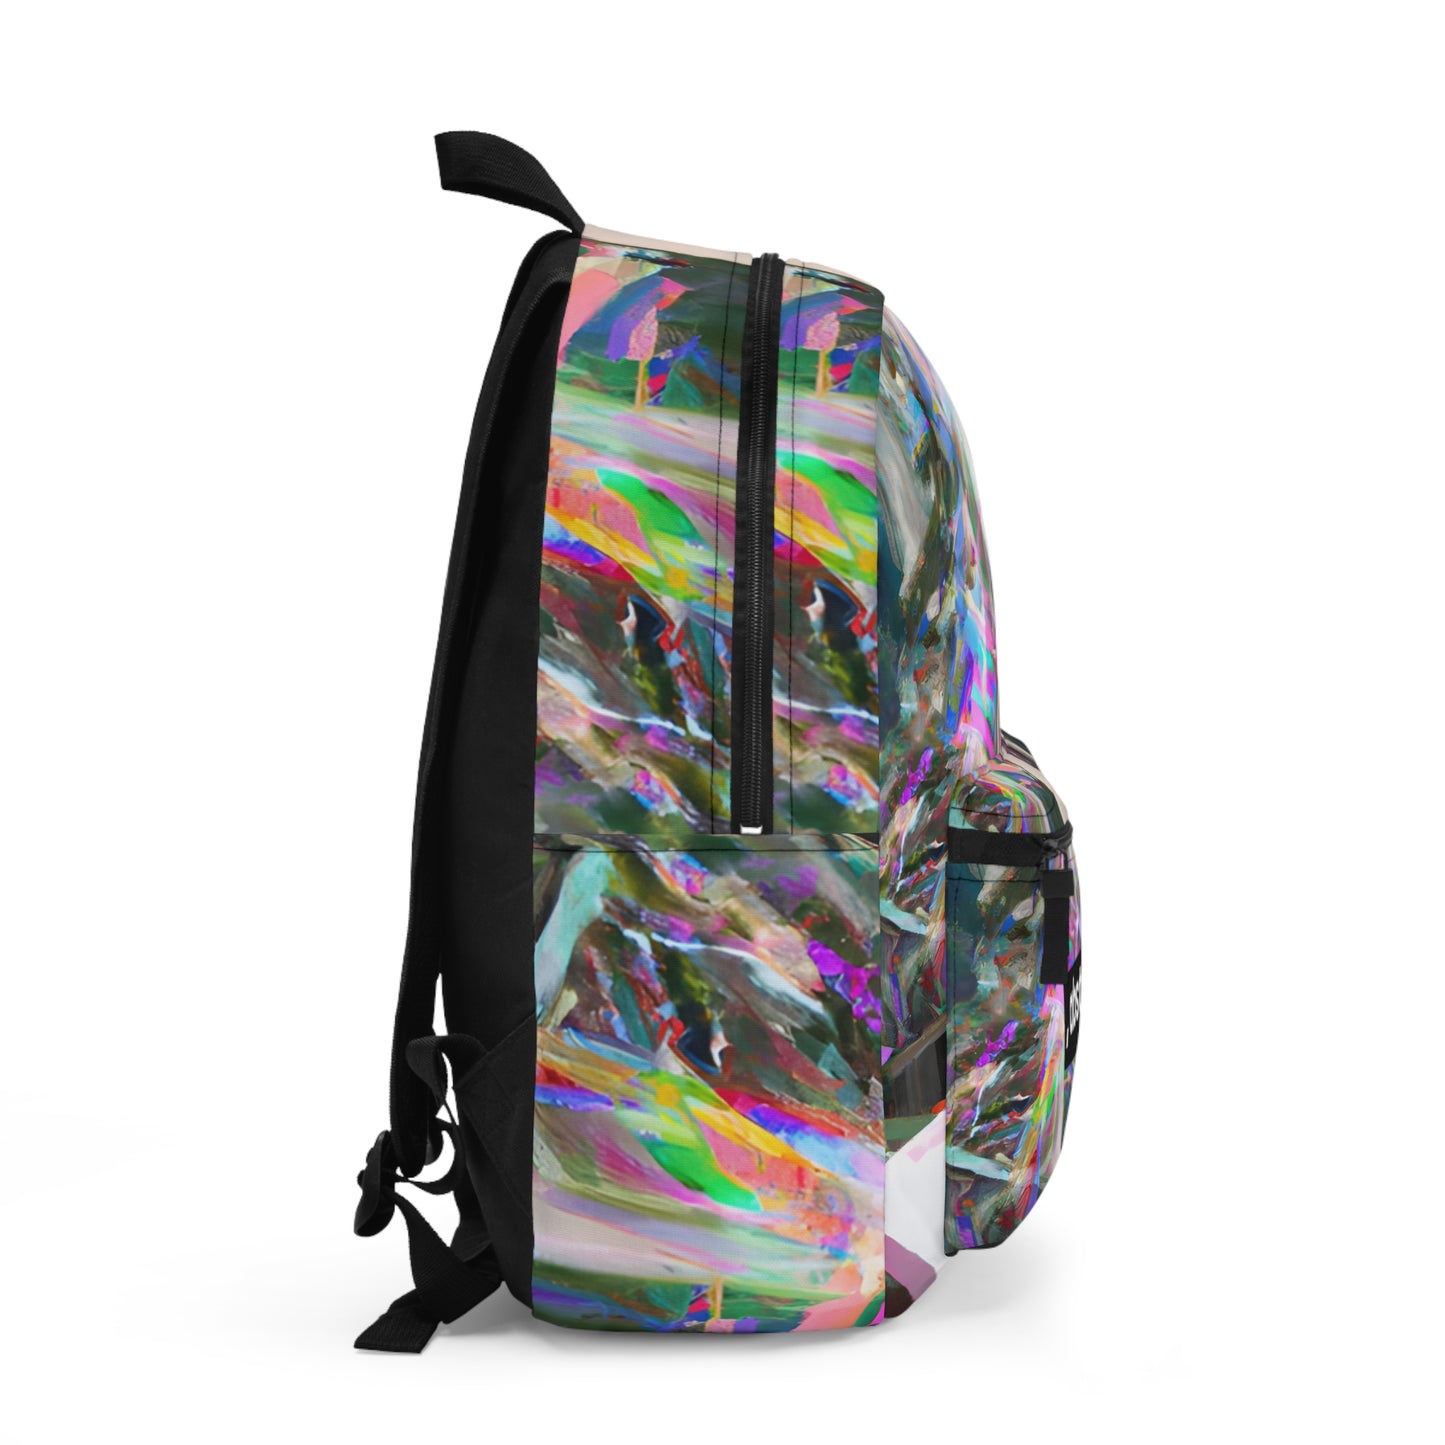 Vertex Integrity - Accrual, Abstractly - Backpack